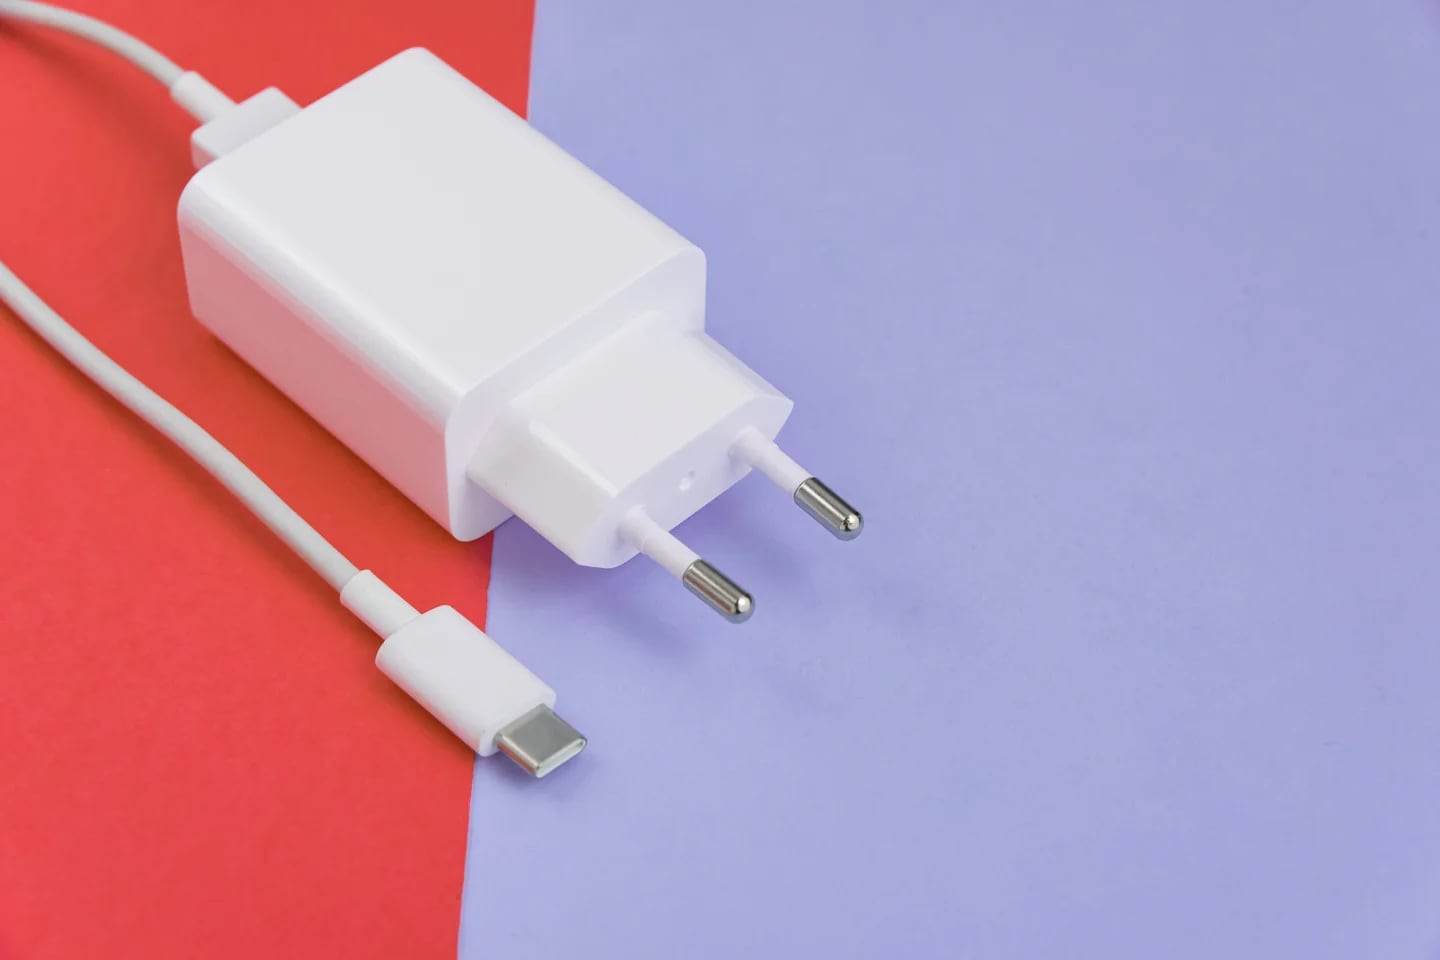 Another suggestion is to use original chargers